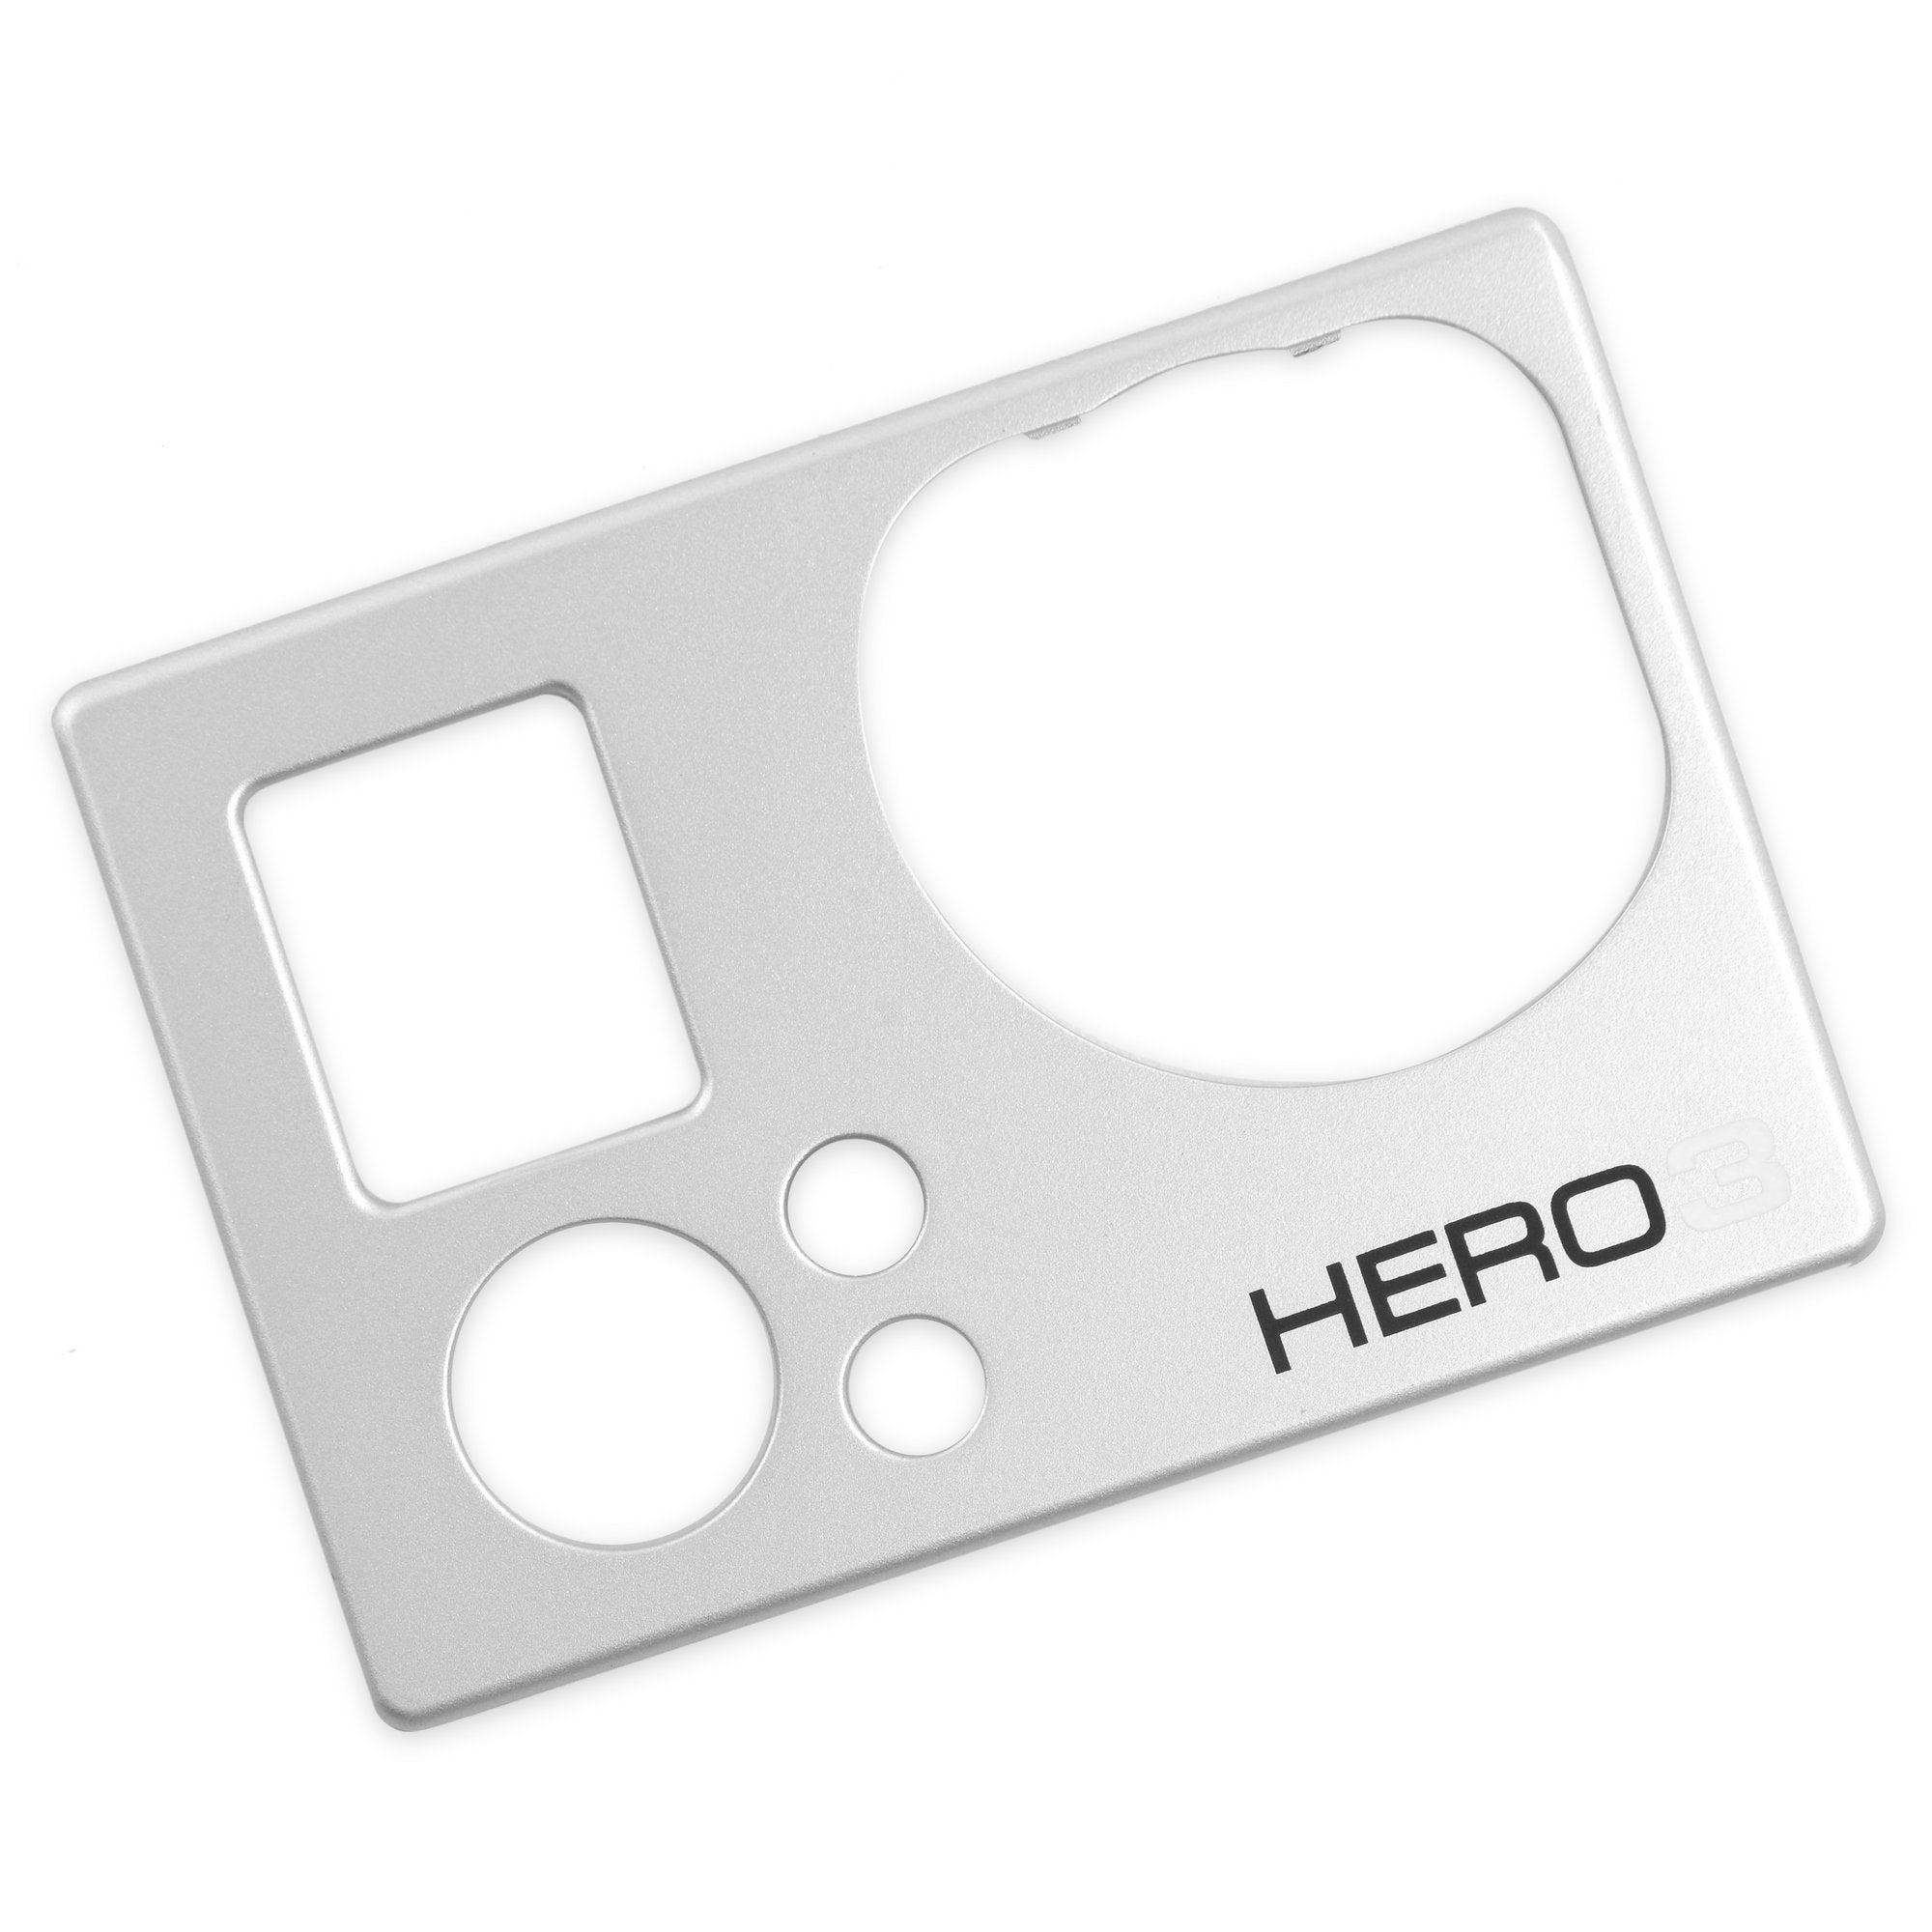 GoPro Hero3 Silver Front Panel